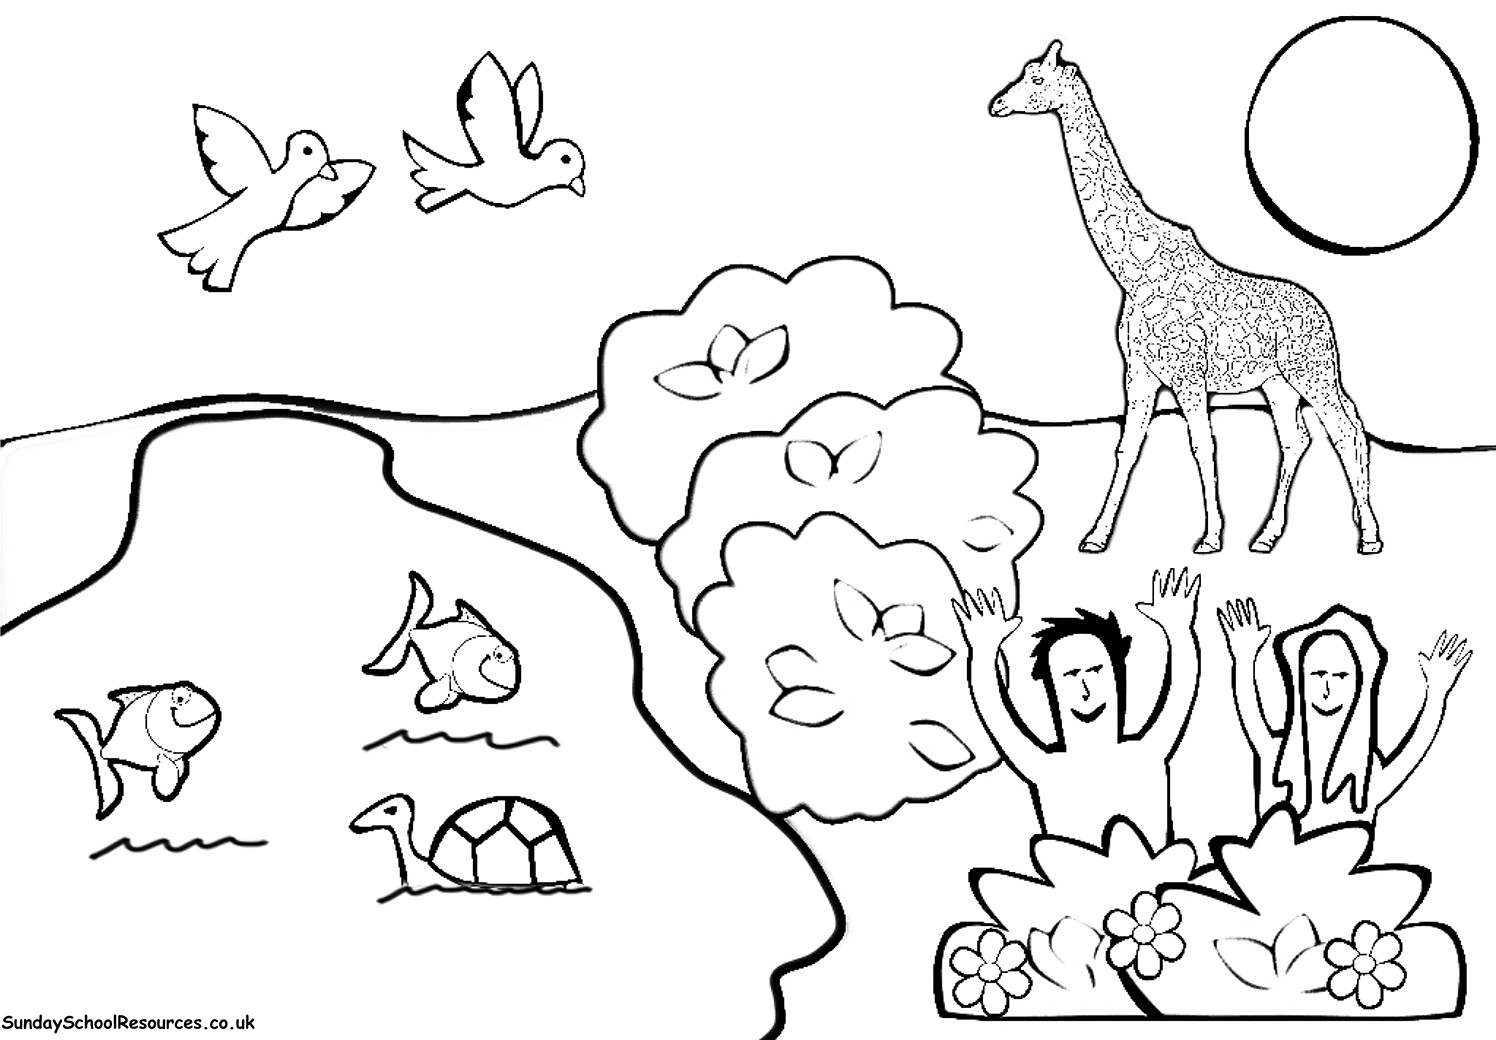 Creation Coloring Pages For Toddlers
 Sunday School Creation Coloring Pages Printable